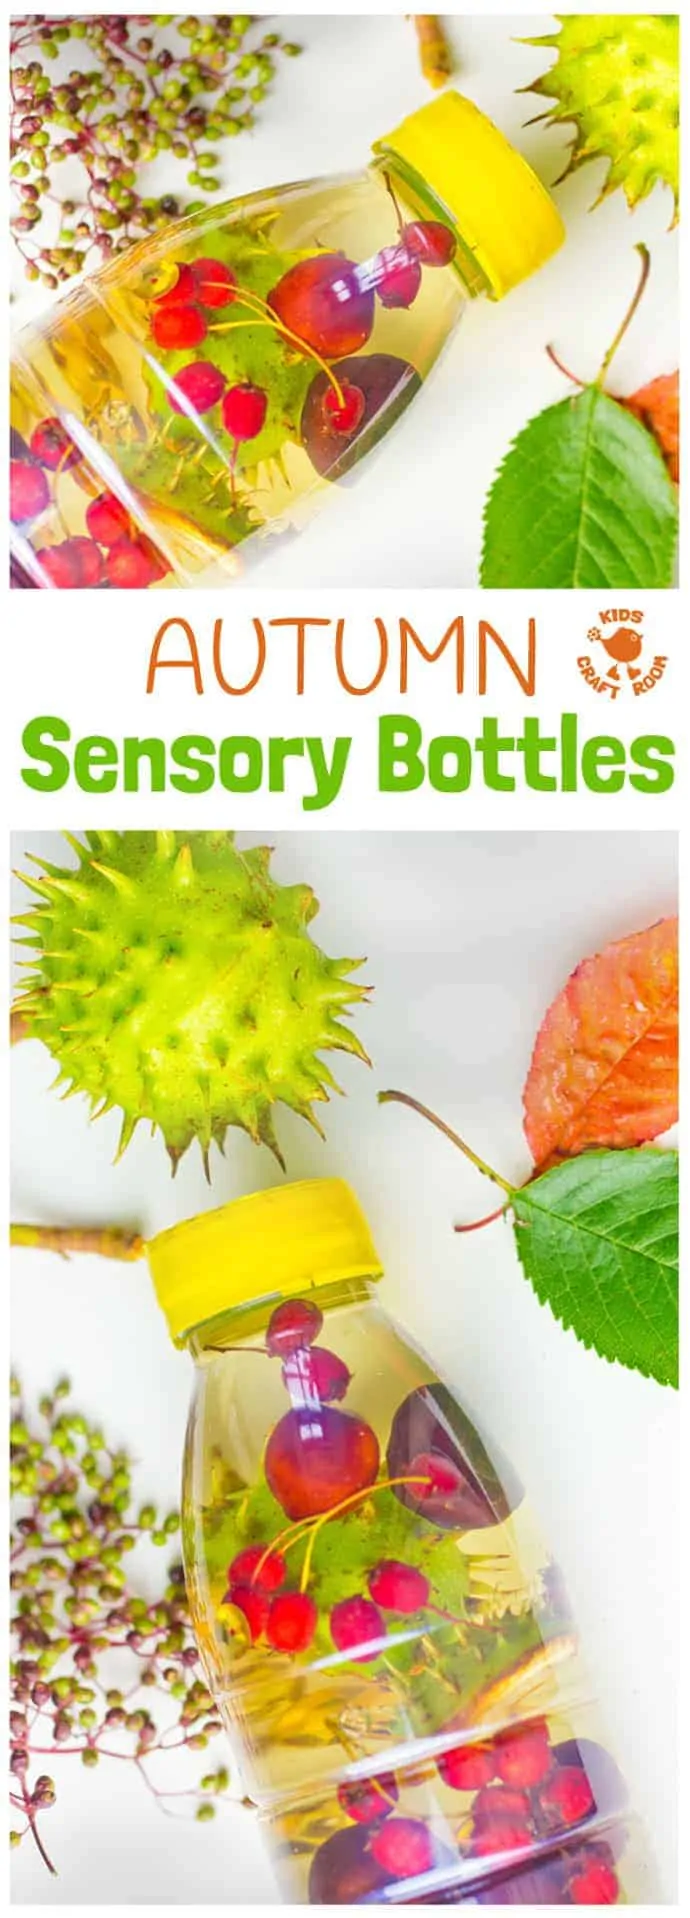 FALL SENSORY BOTTLES - Let babies and toddlers explore the colours, sounds, shapes and patterns of Fall/Autumn safely with attractive homemade autumn sensory bottles. Seasonal sensory play with discovery bottles for little hands.